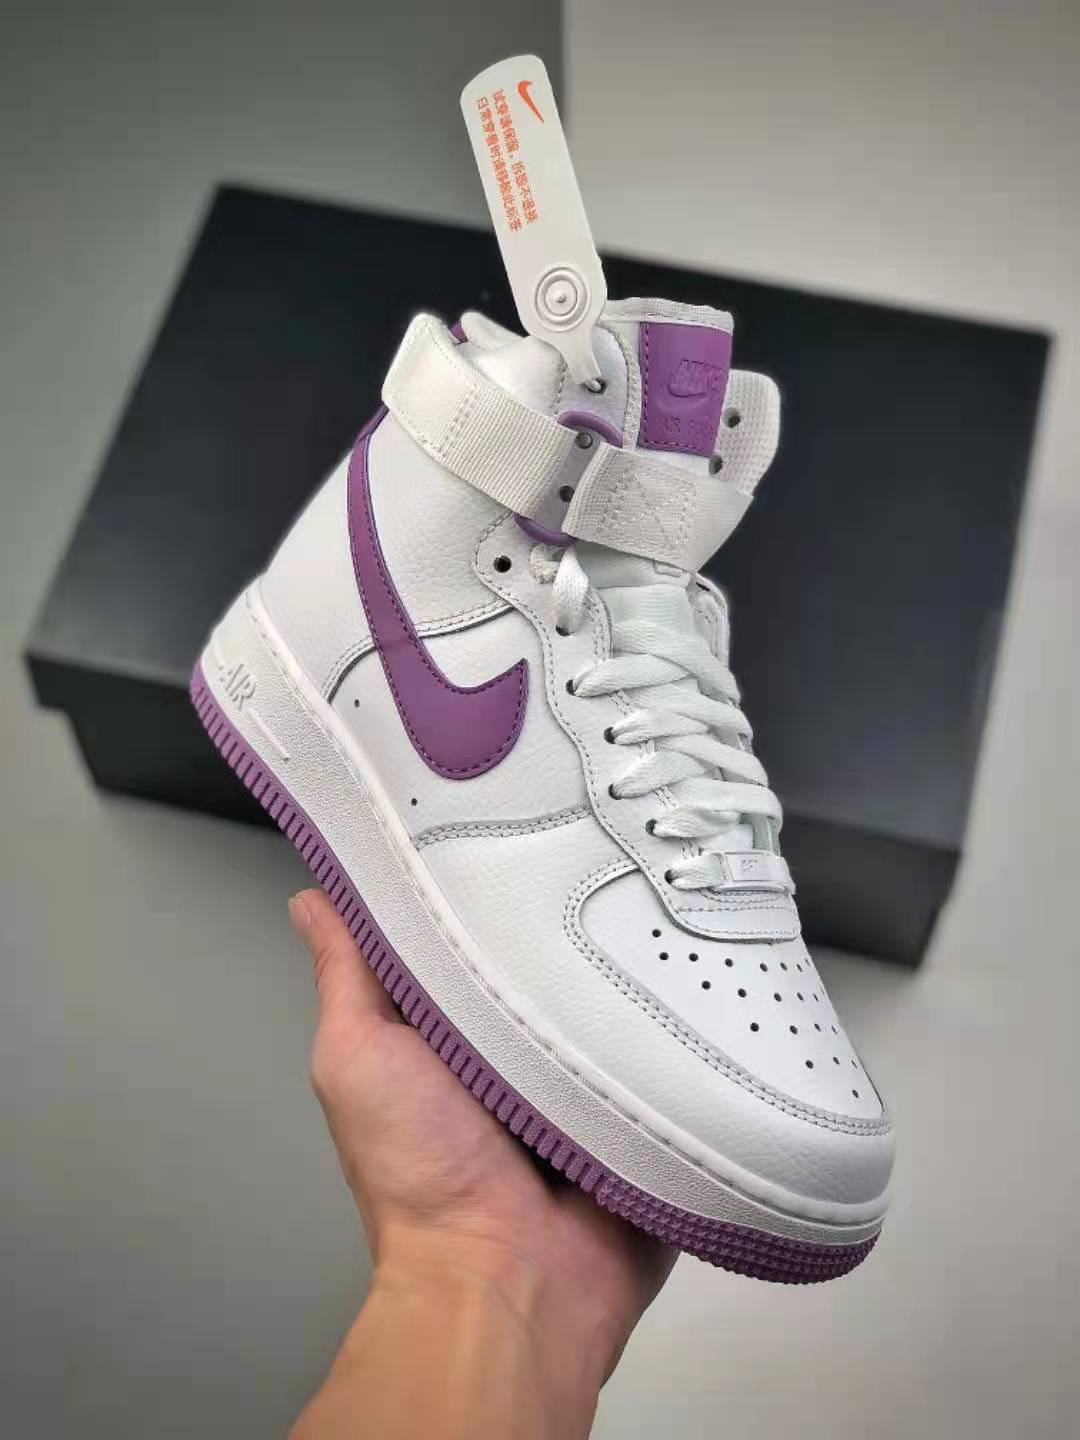 Nike Air Force 1 High 'White Dark Orchid' 334031-112 - Shop the Latest Nike Air Force 1 High Style